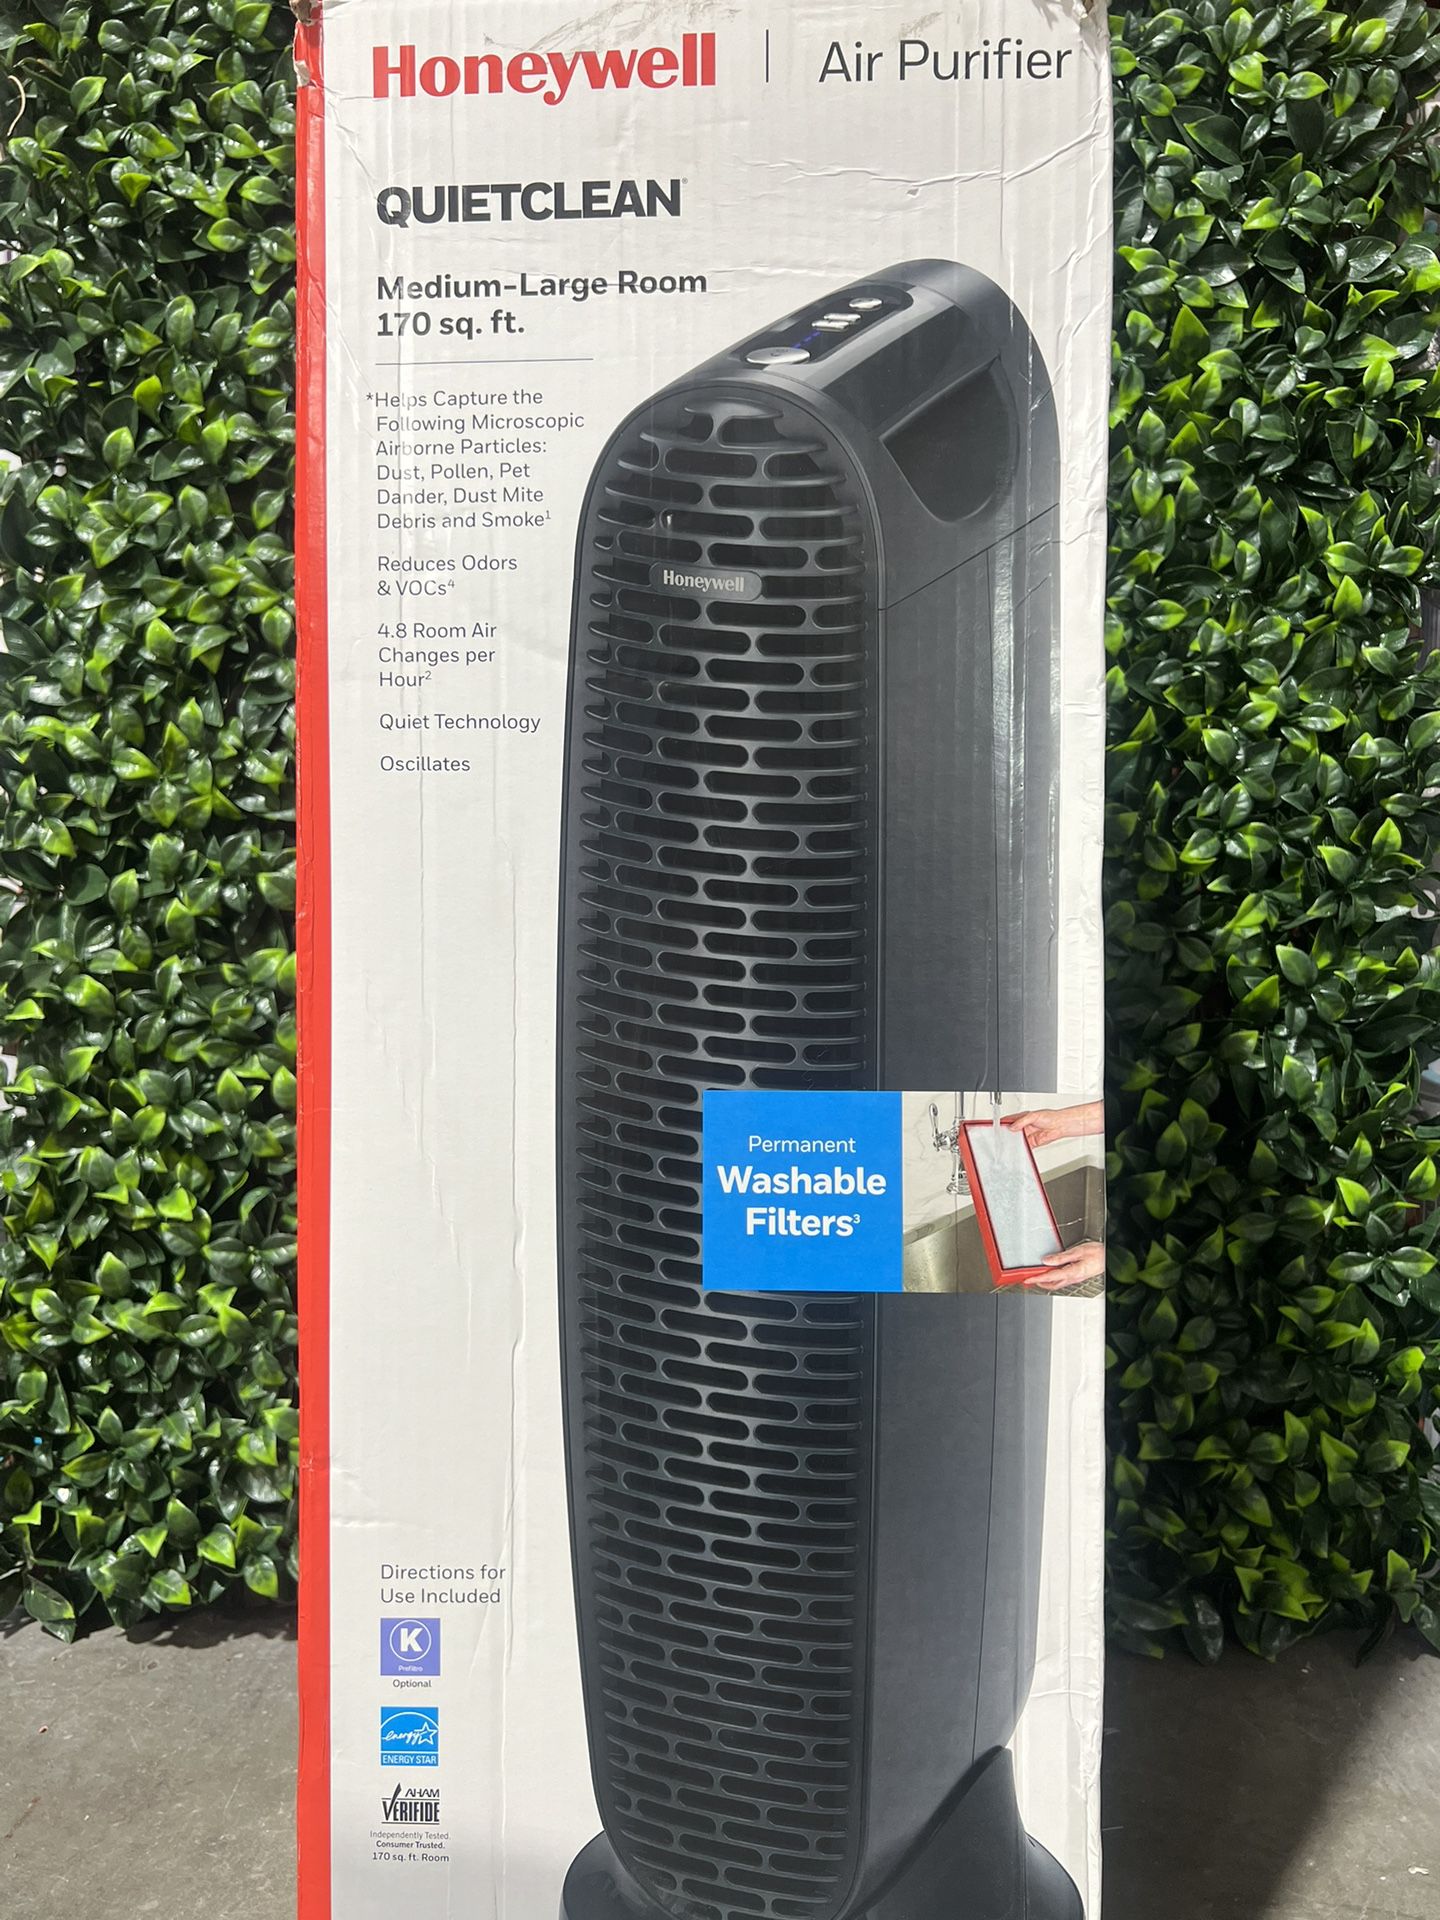 tower air purifier Only $80 🫡😇😎🙏🏼🚨🚨🚨🚨🚨